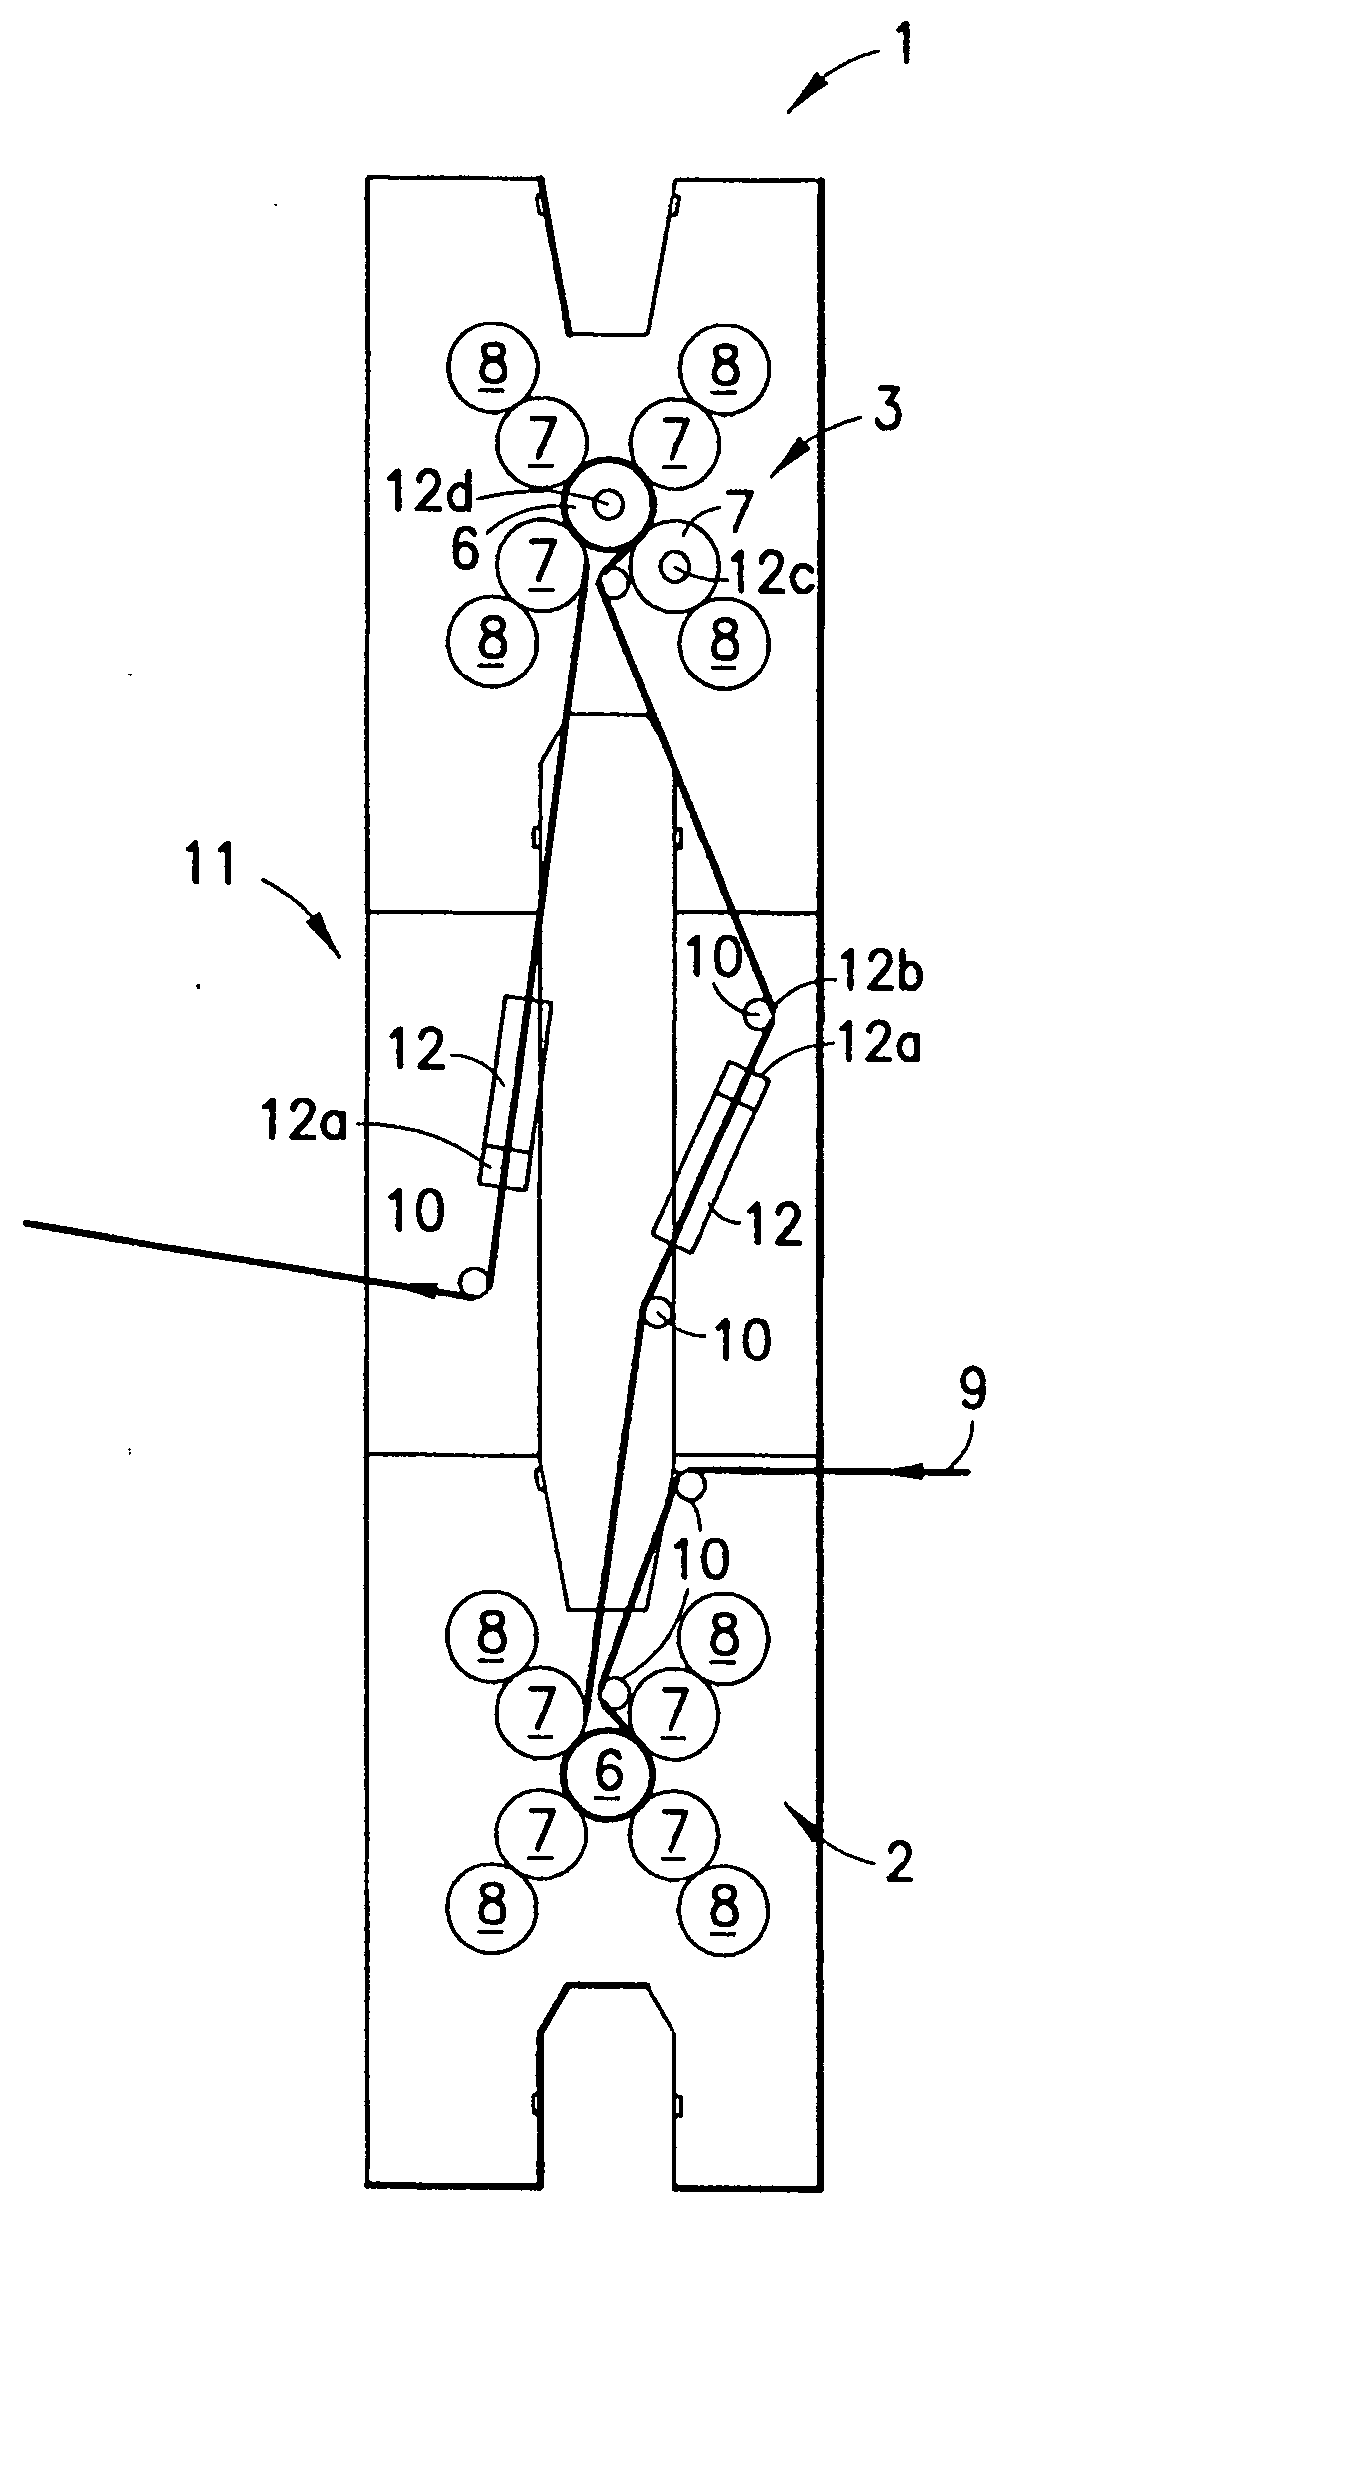 Web-fed rotary press and method for operating it